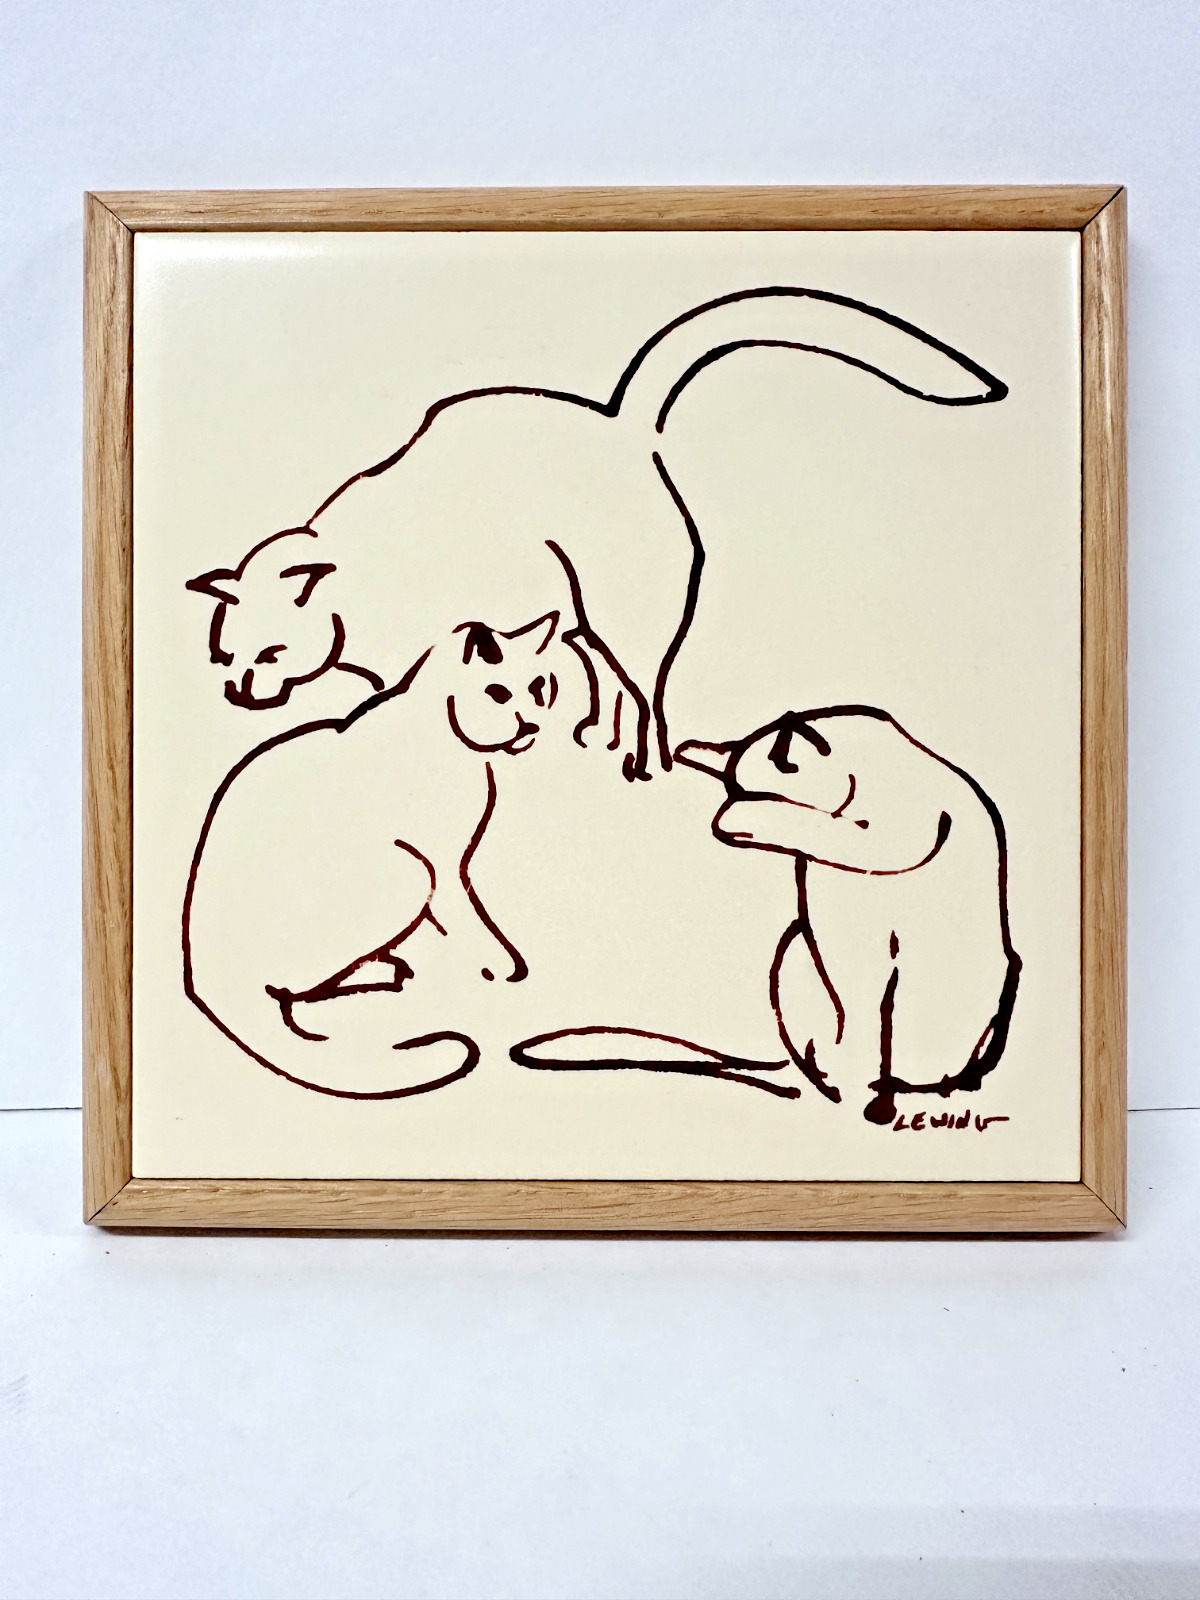 Paul Lewing Ceramic Wall Hanging Tile with Trio of Cats - 7\